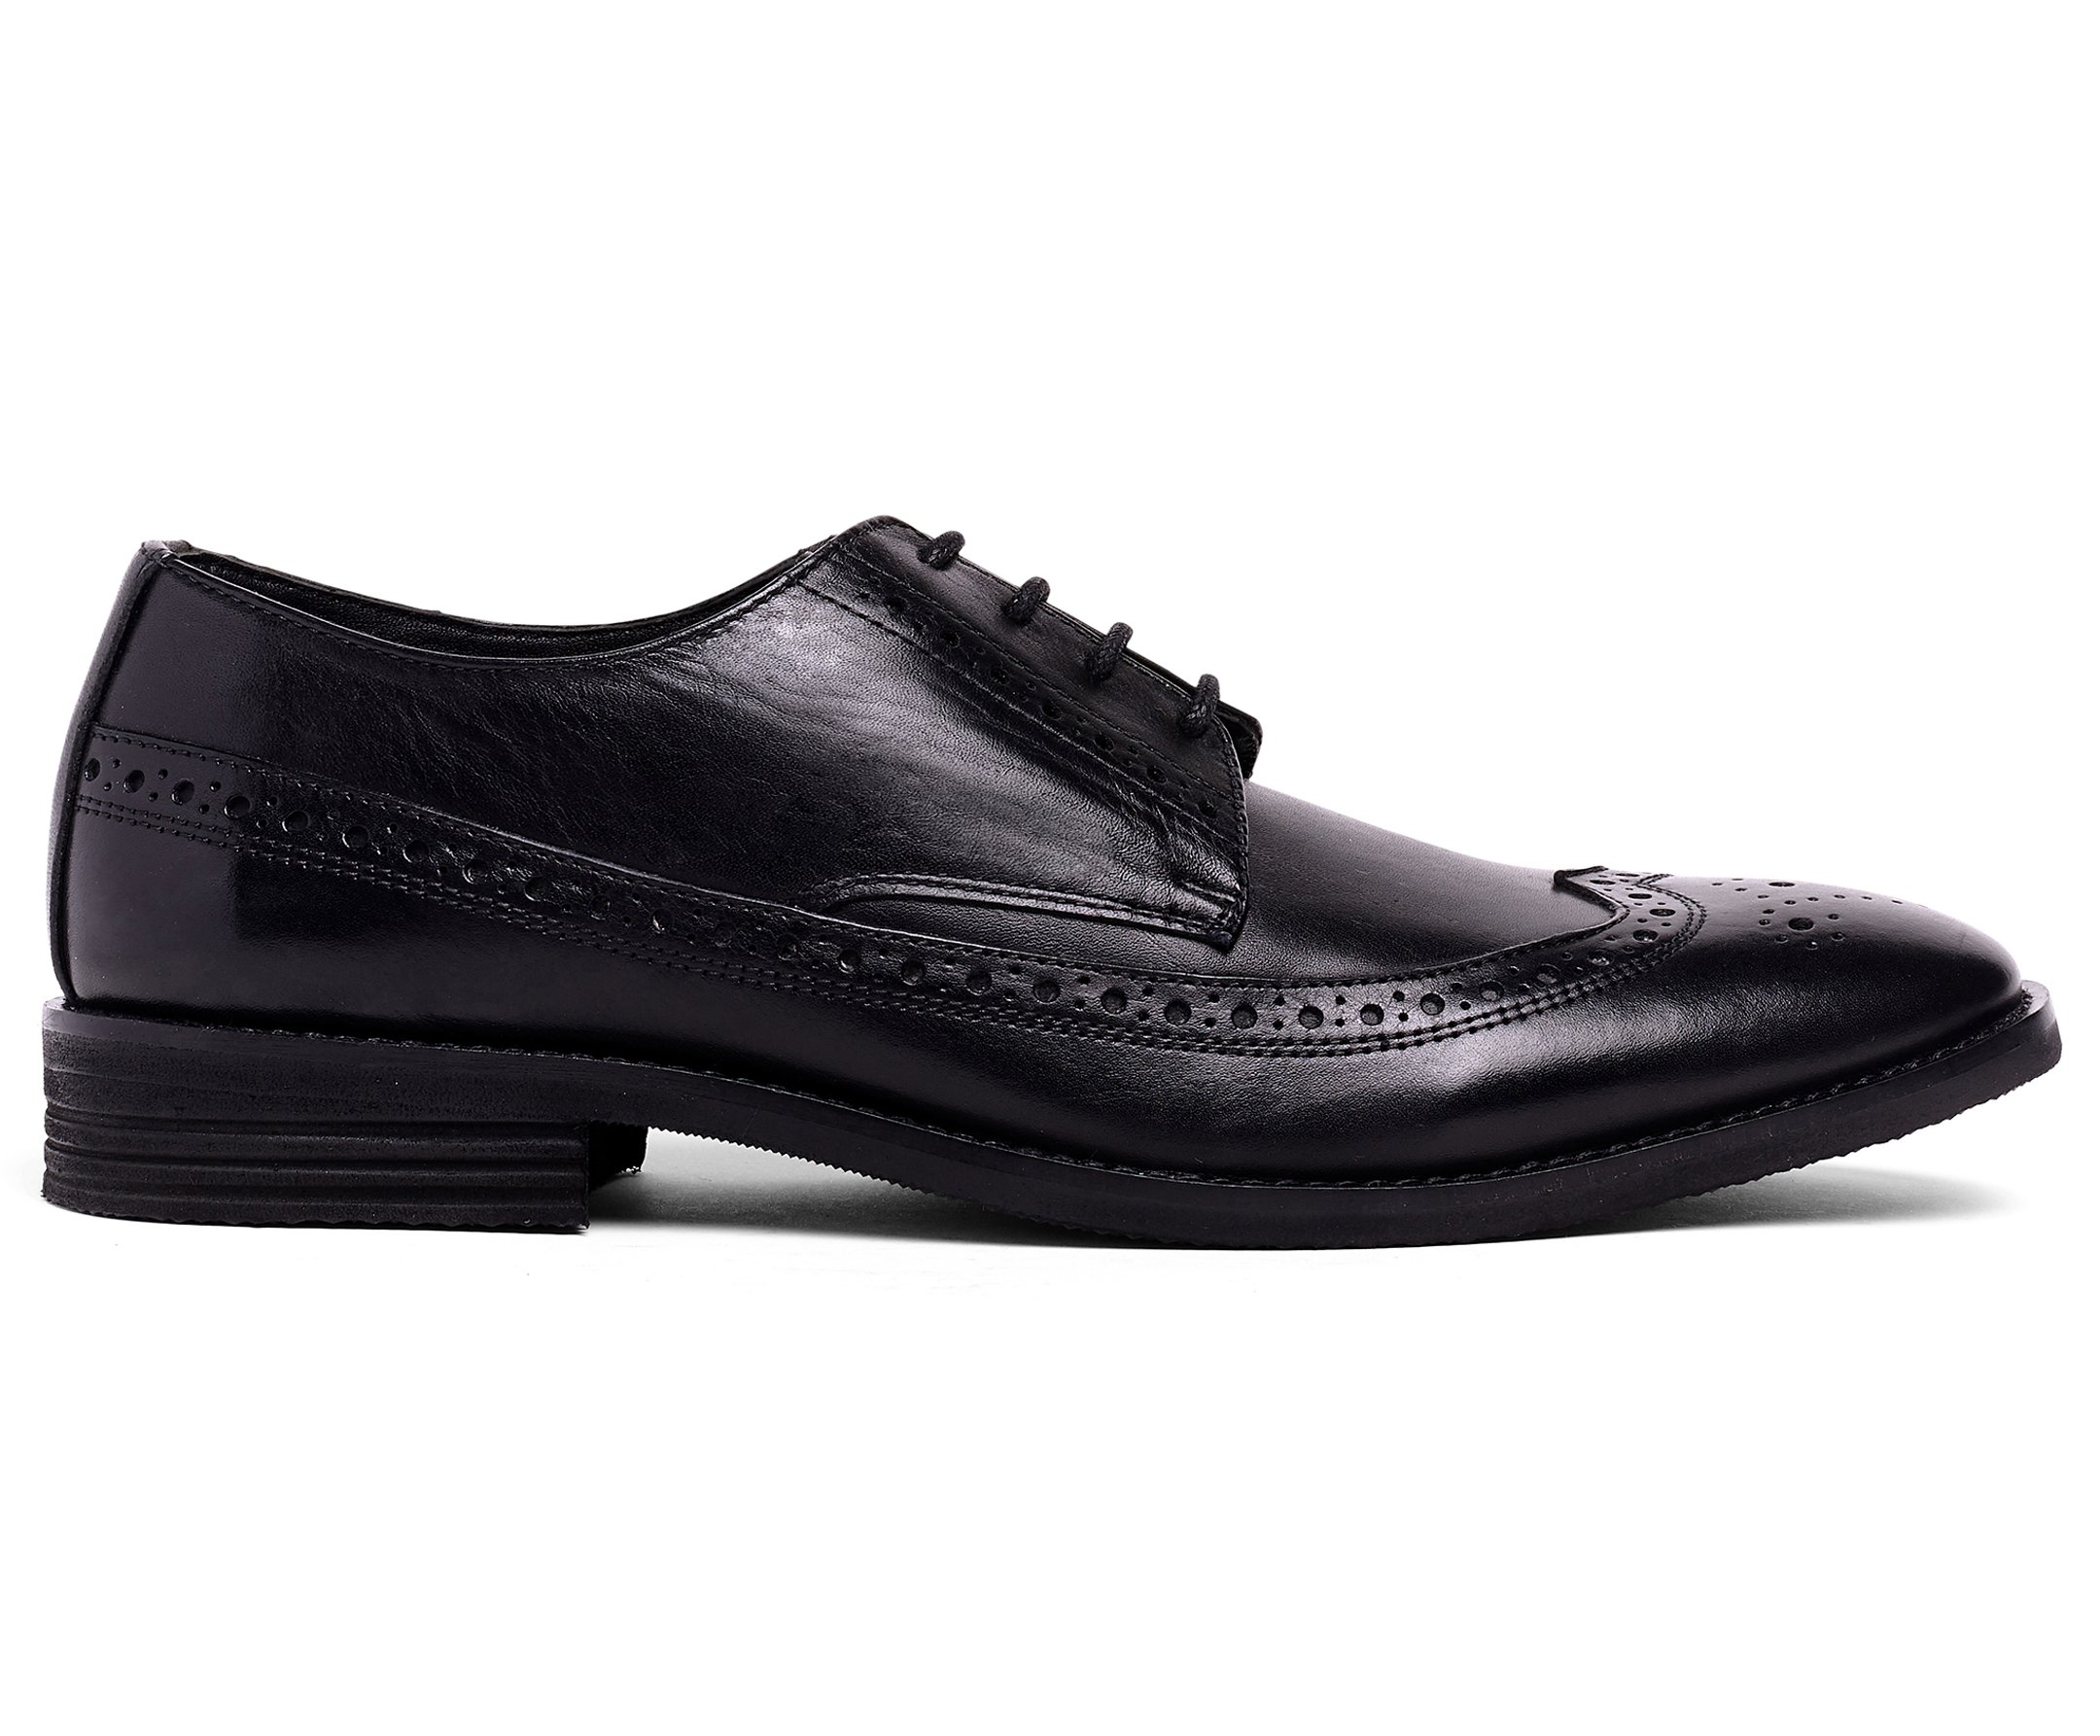 Paolo Bove Florenza Men's Wingtip Oxford - image 2 of 5